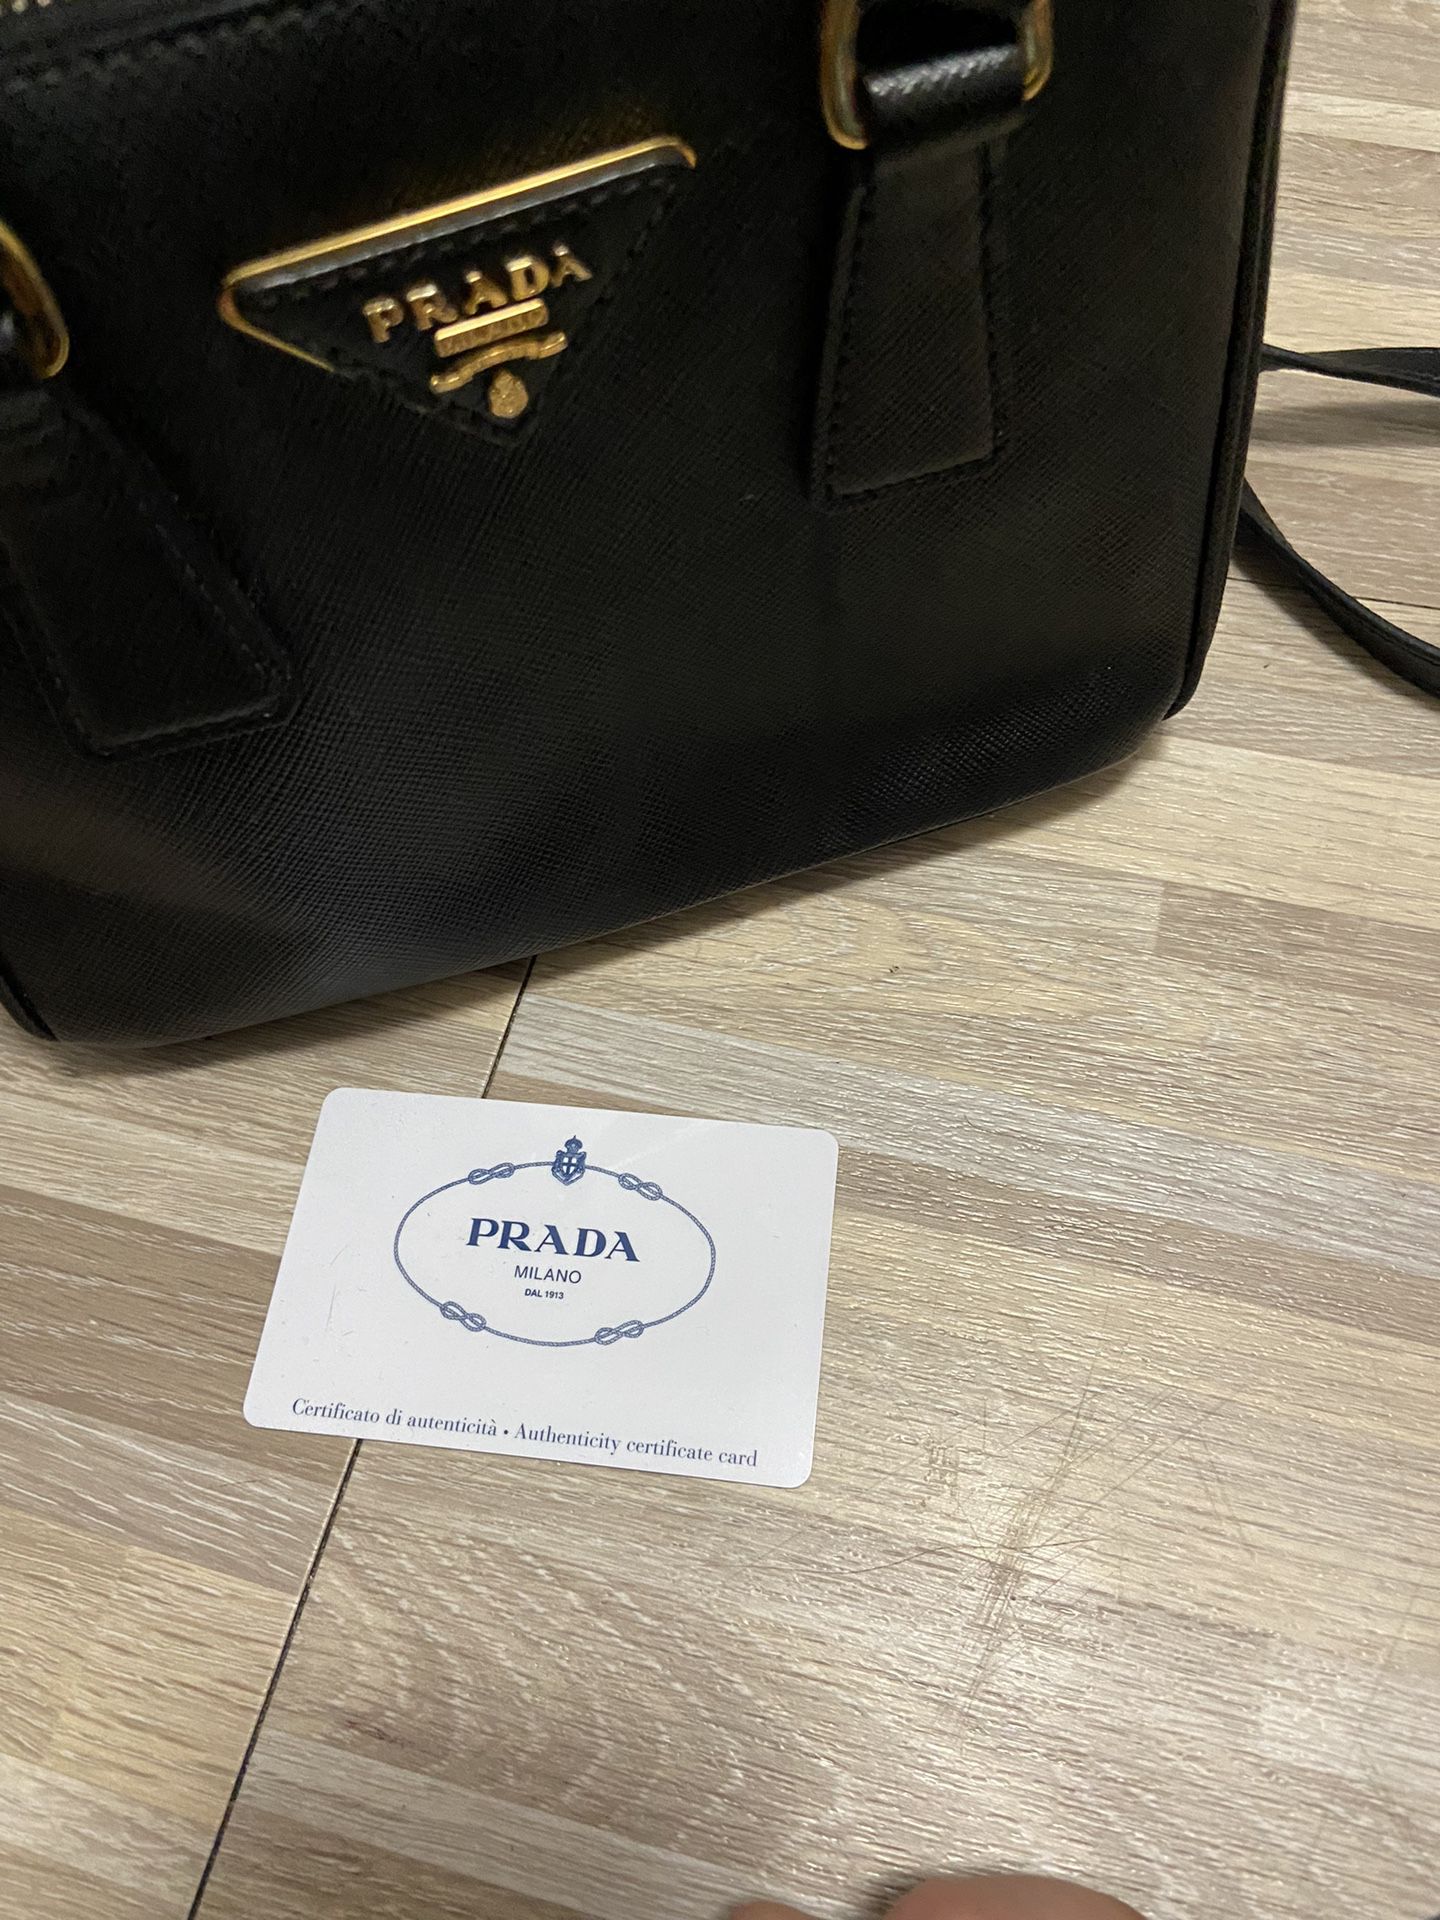 prada milano dal 1913 Hand Bag With Authenticity Certificate Card